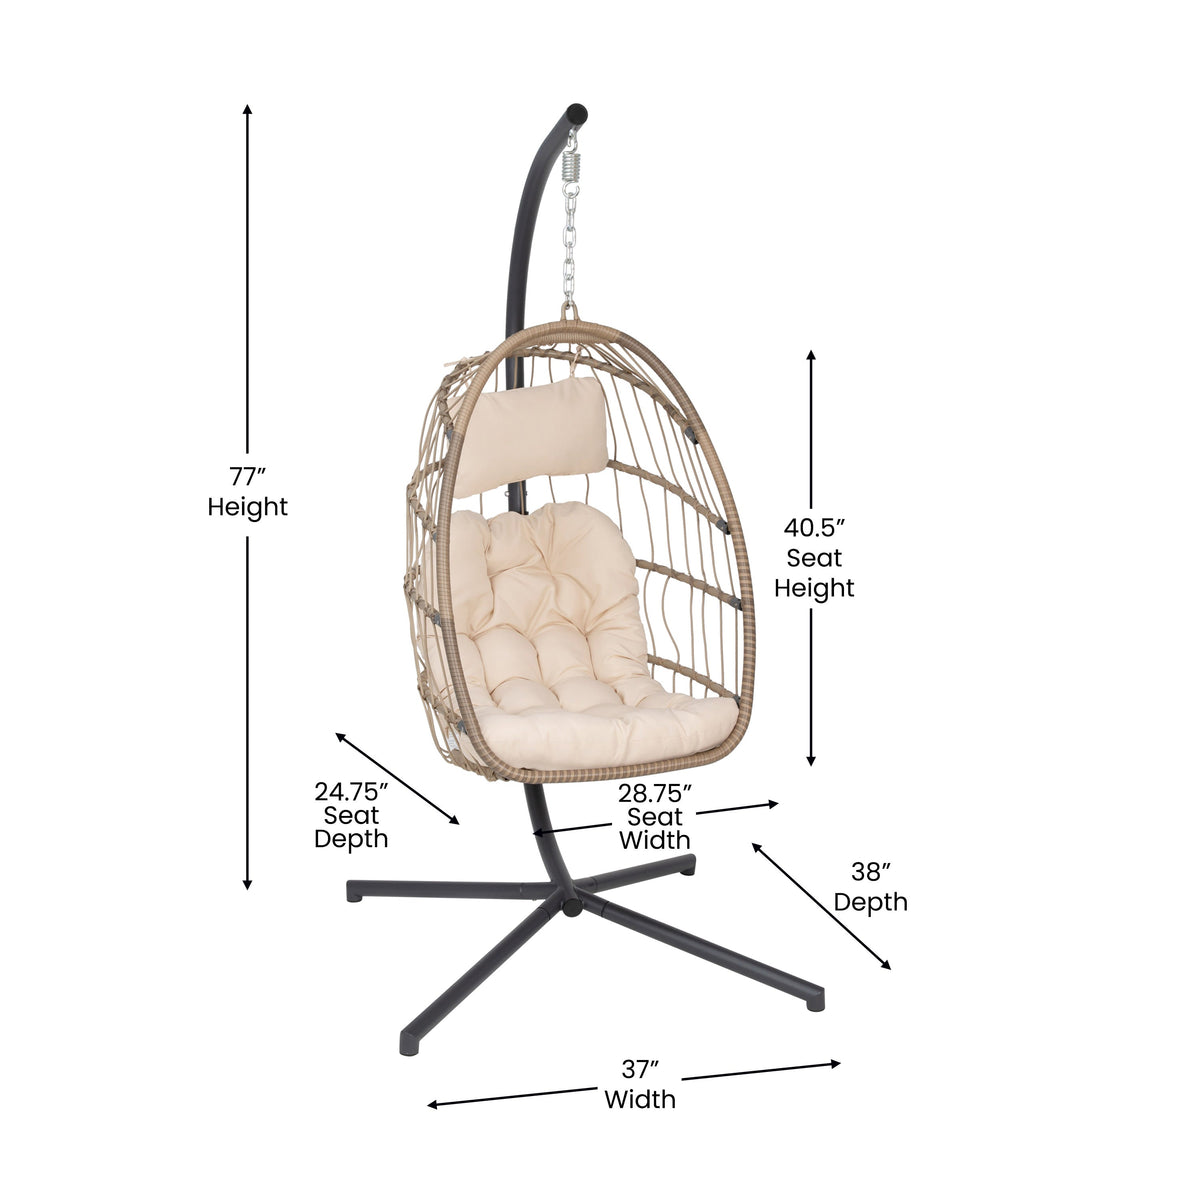 Natural |#| Foldable Hanging Egg Chair with Included C-Stand and Cream Cushions - Natural